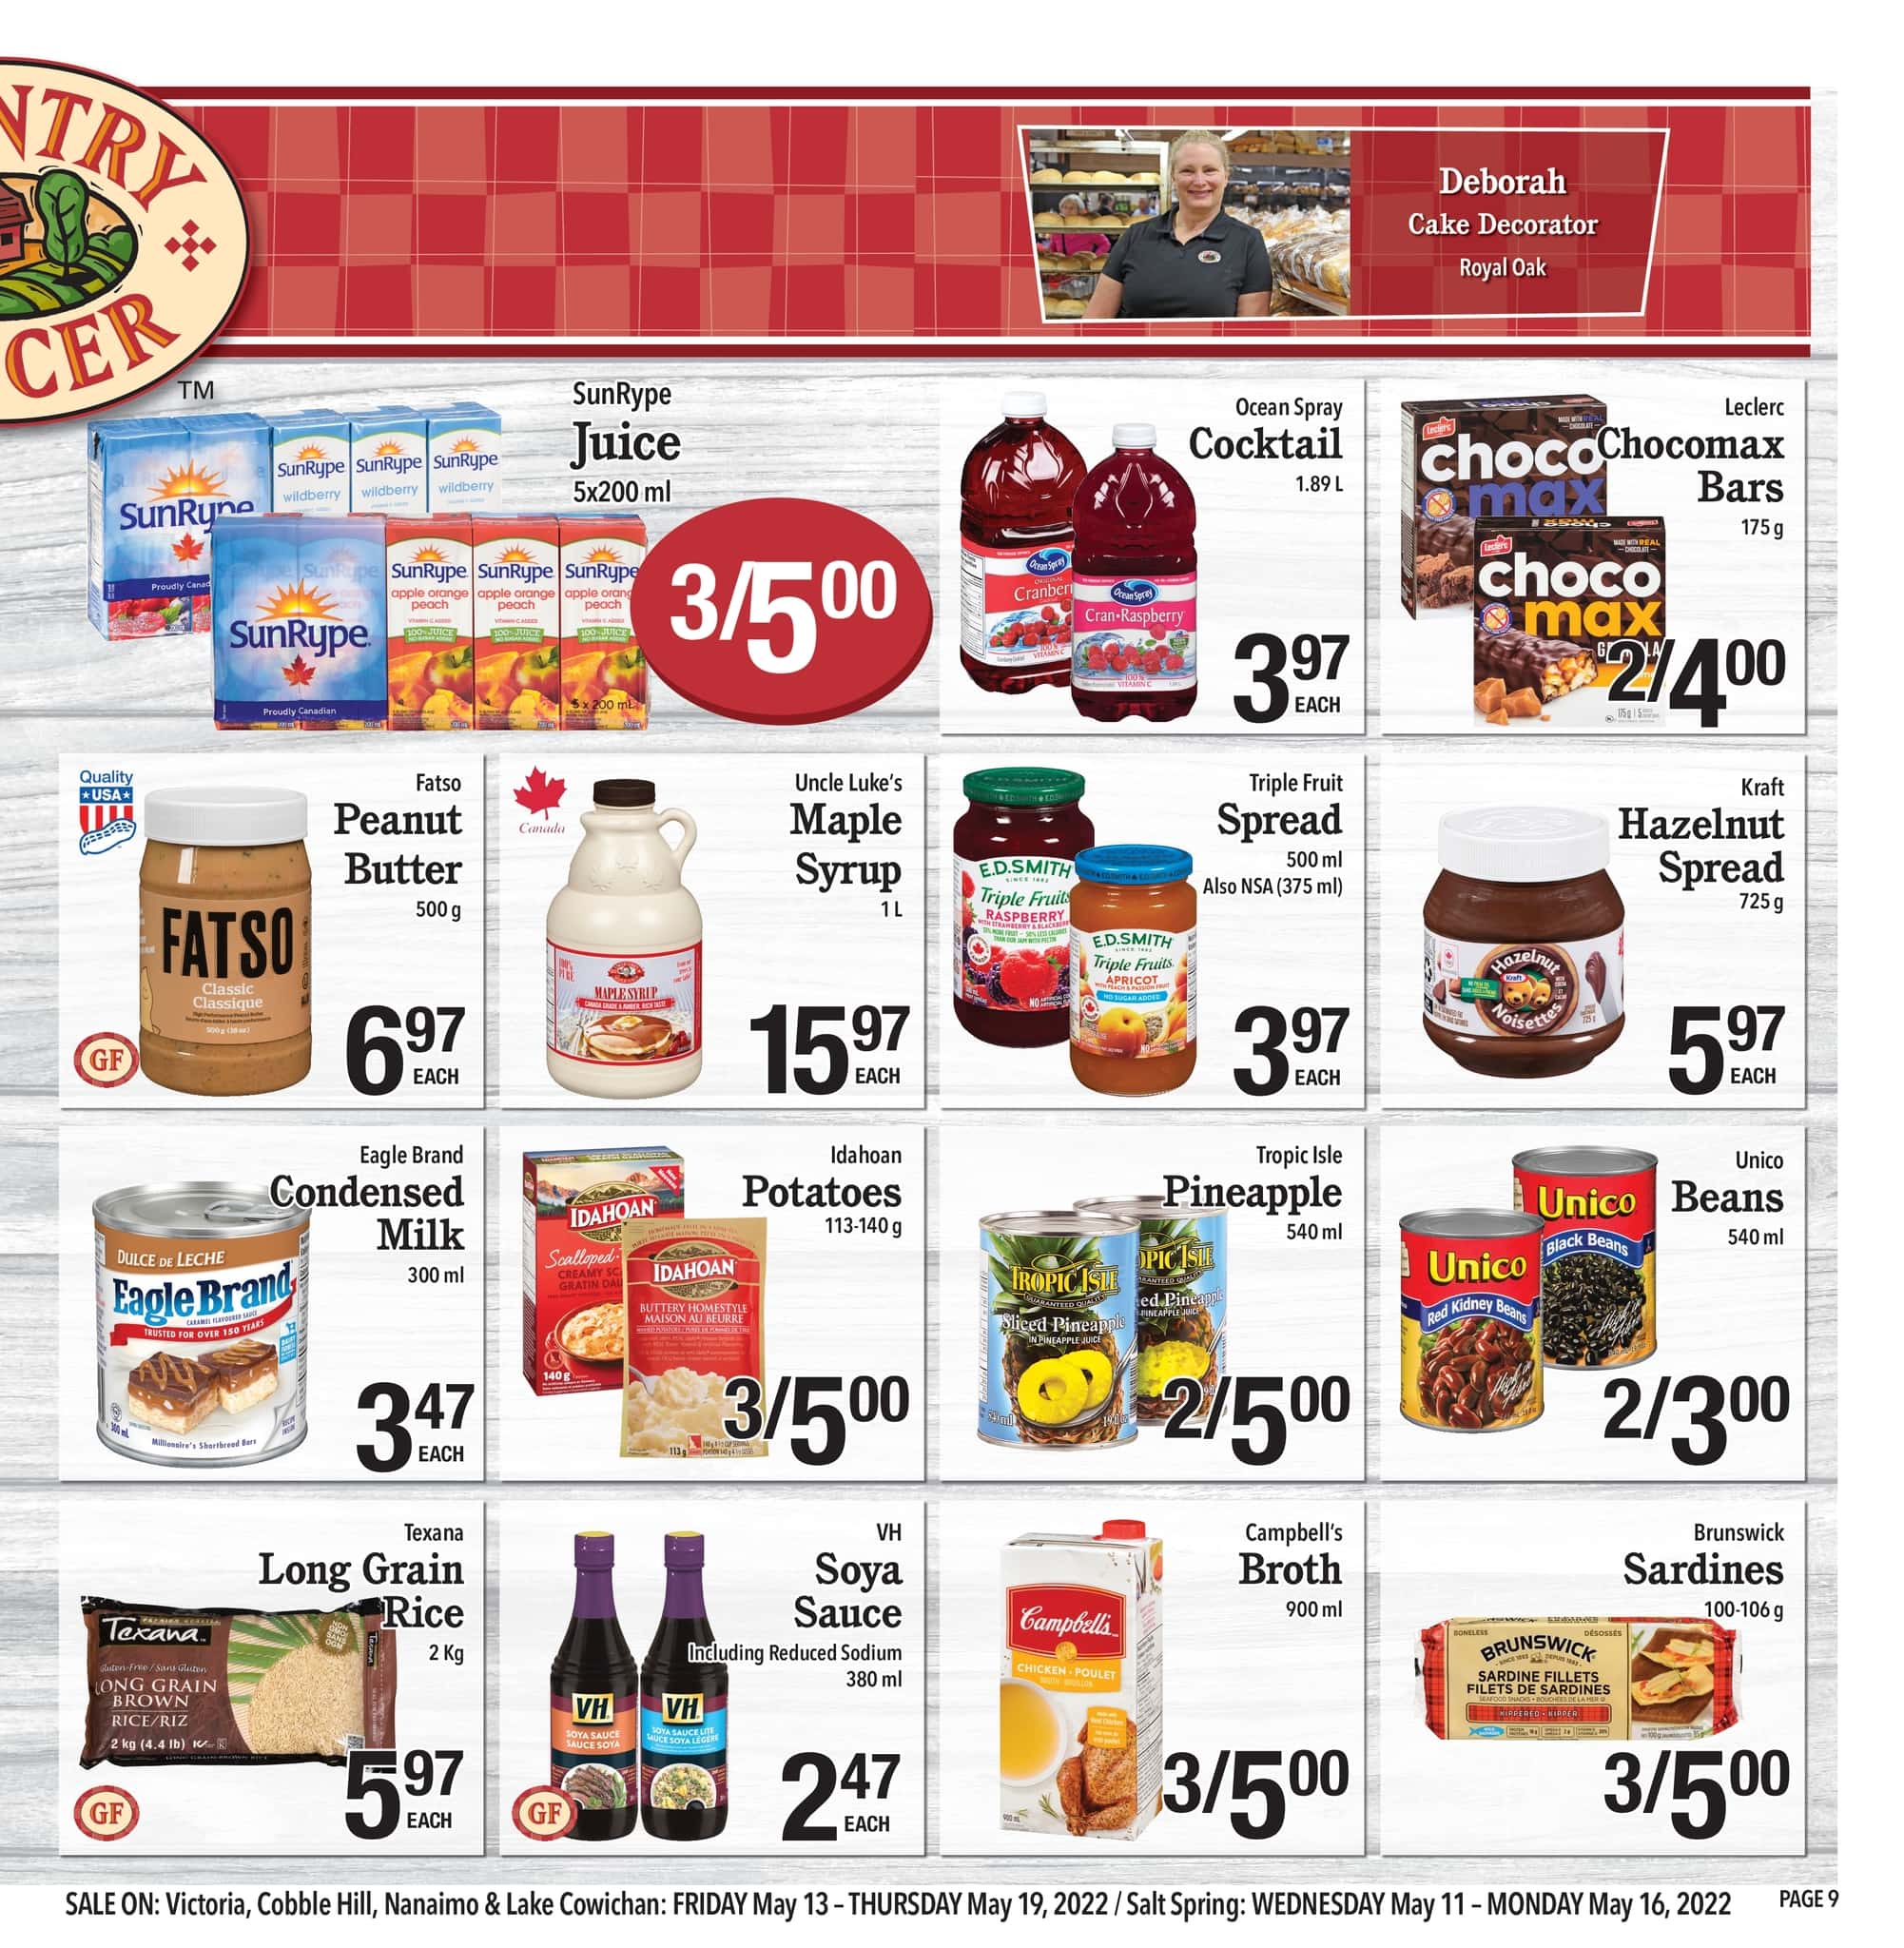 Country Grocer - Weekly Flyer Specials - Page 9